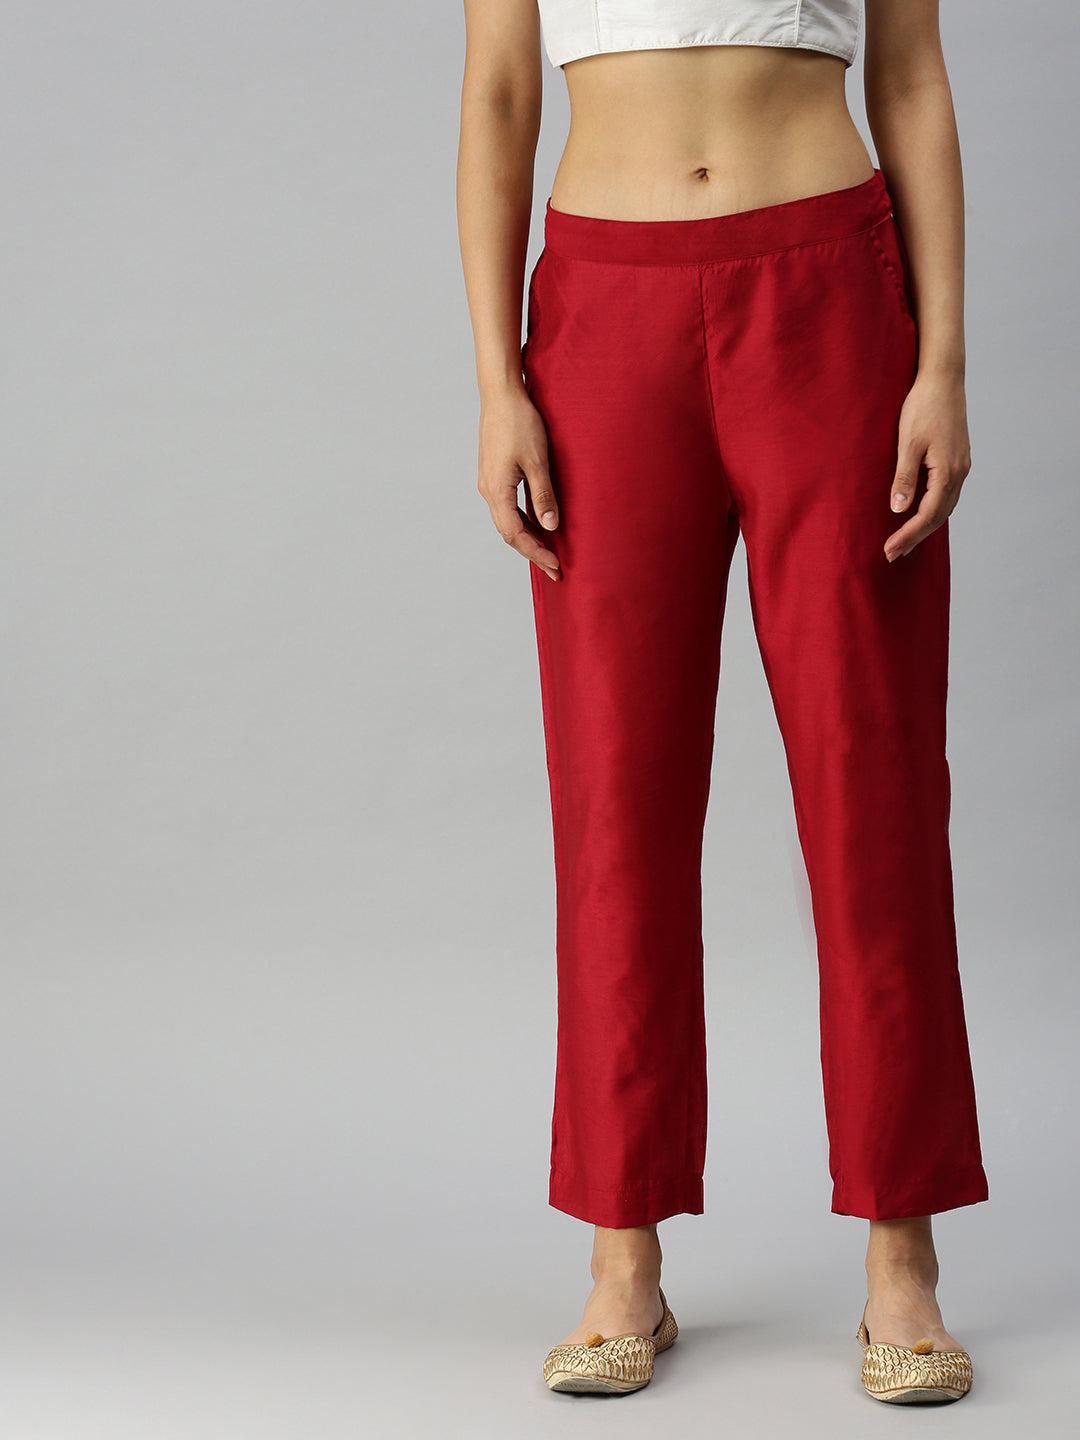 Buy Rama Red Colour Classic Women's Rayon Cigarette Pants at Amazon.in